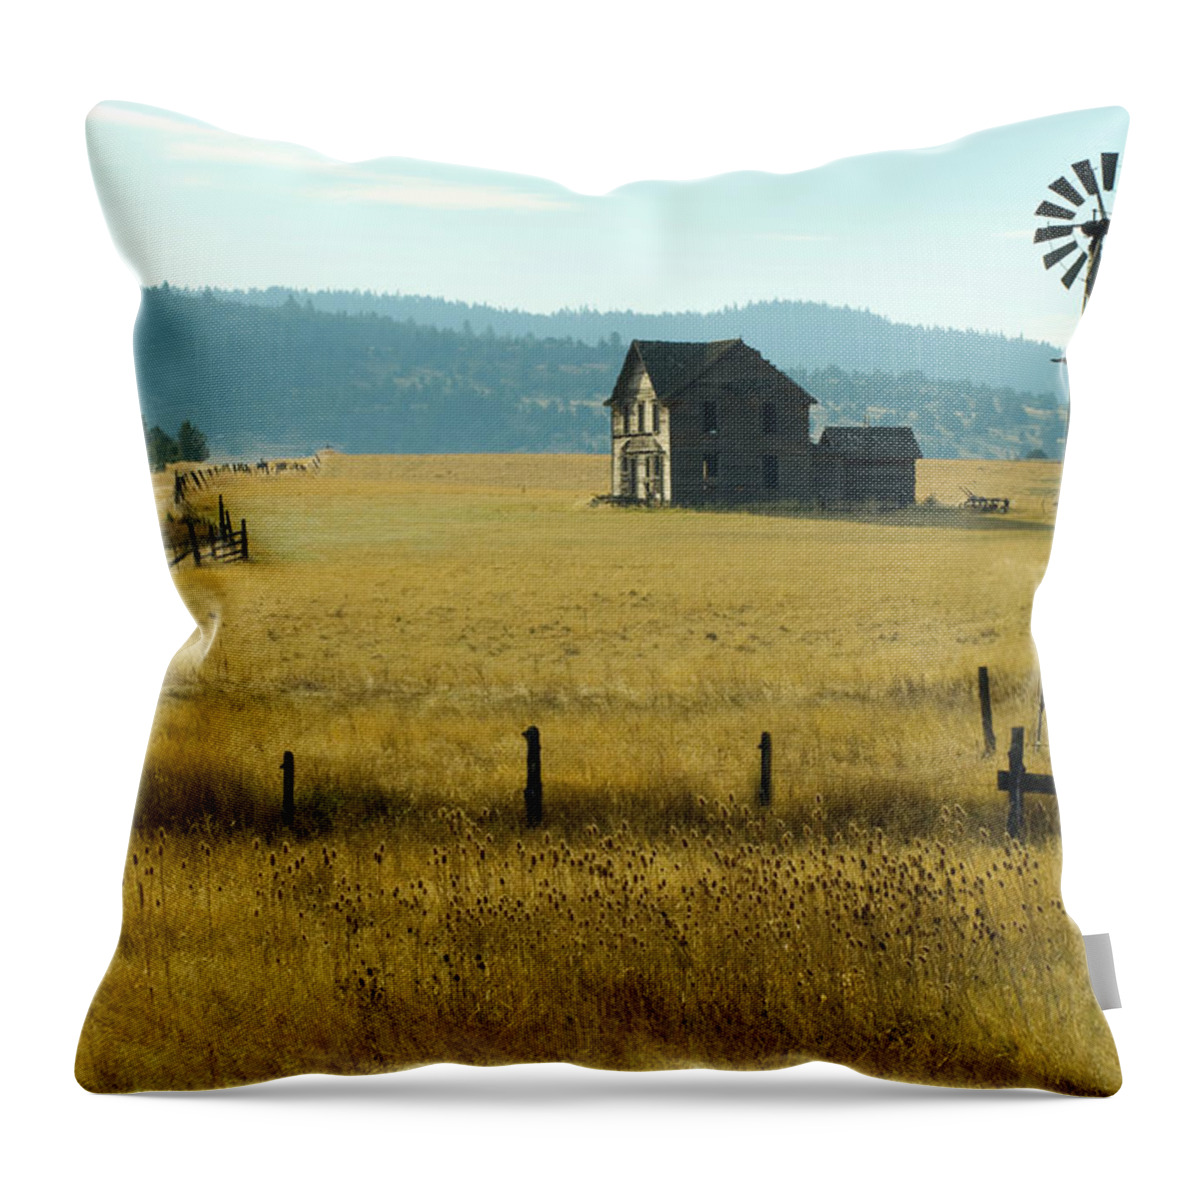 Scenics Throw Pillow featuring the photograph Steinbeck Homestead W Windmill And Fence by Garyalvis